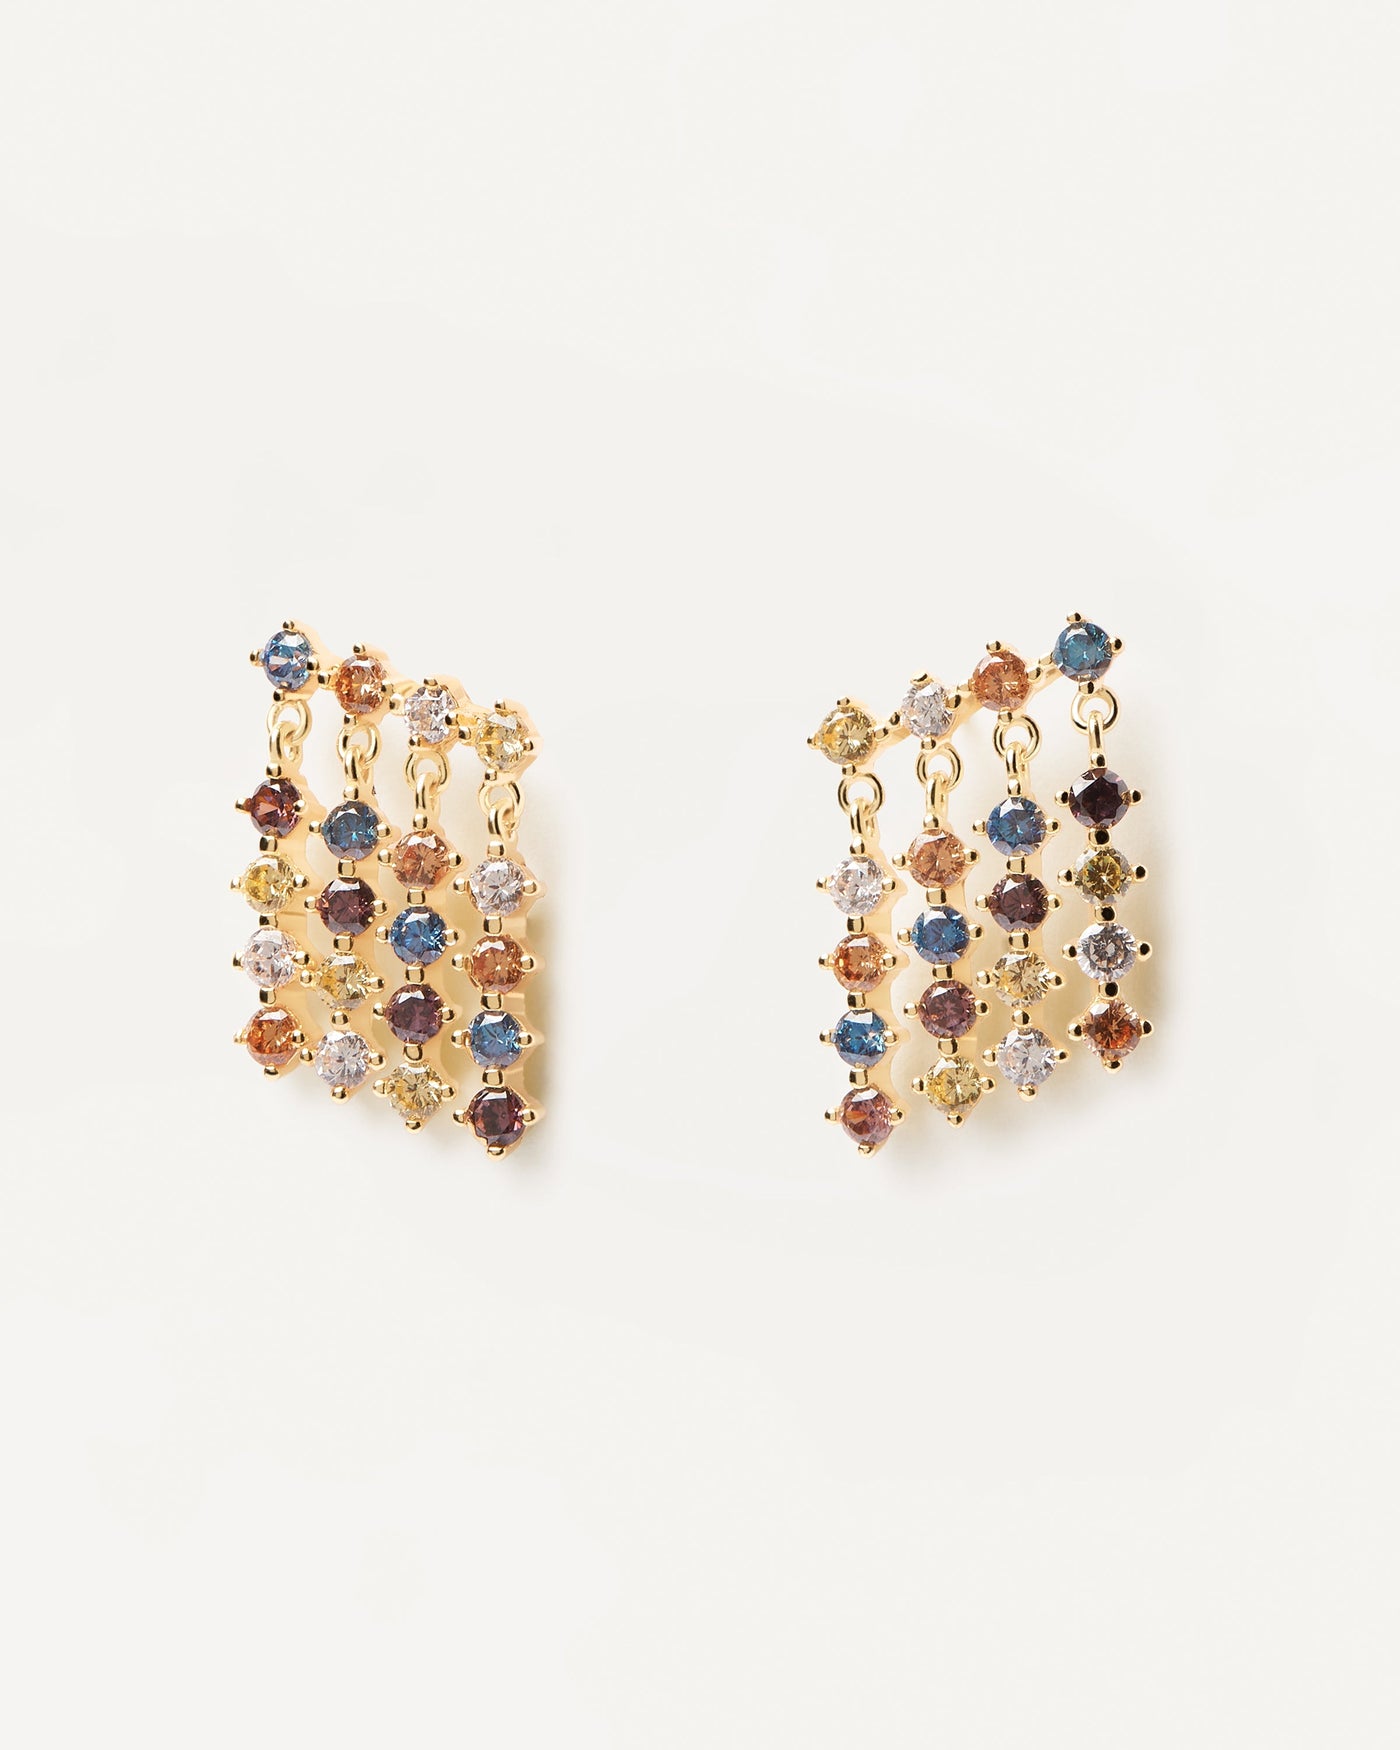 2023 Selection | Willow Earrings. Gold-plated silver hanging earrings made of 4 rows of 5 colorful stones each. Get the latest arrival from PDPAOLA. Place your order safely and get this Best Seller. Free Shipping.